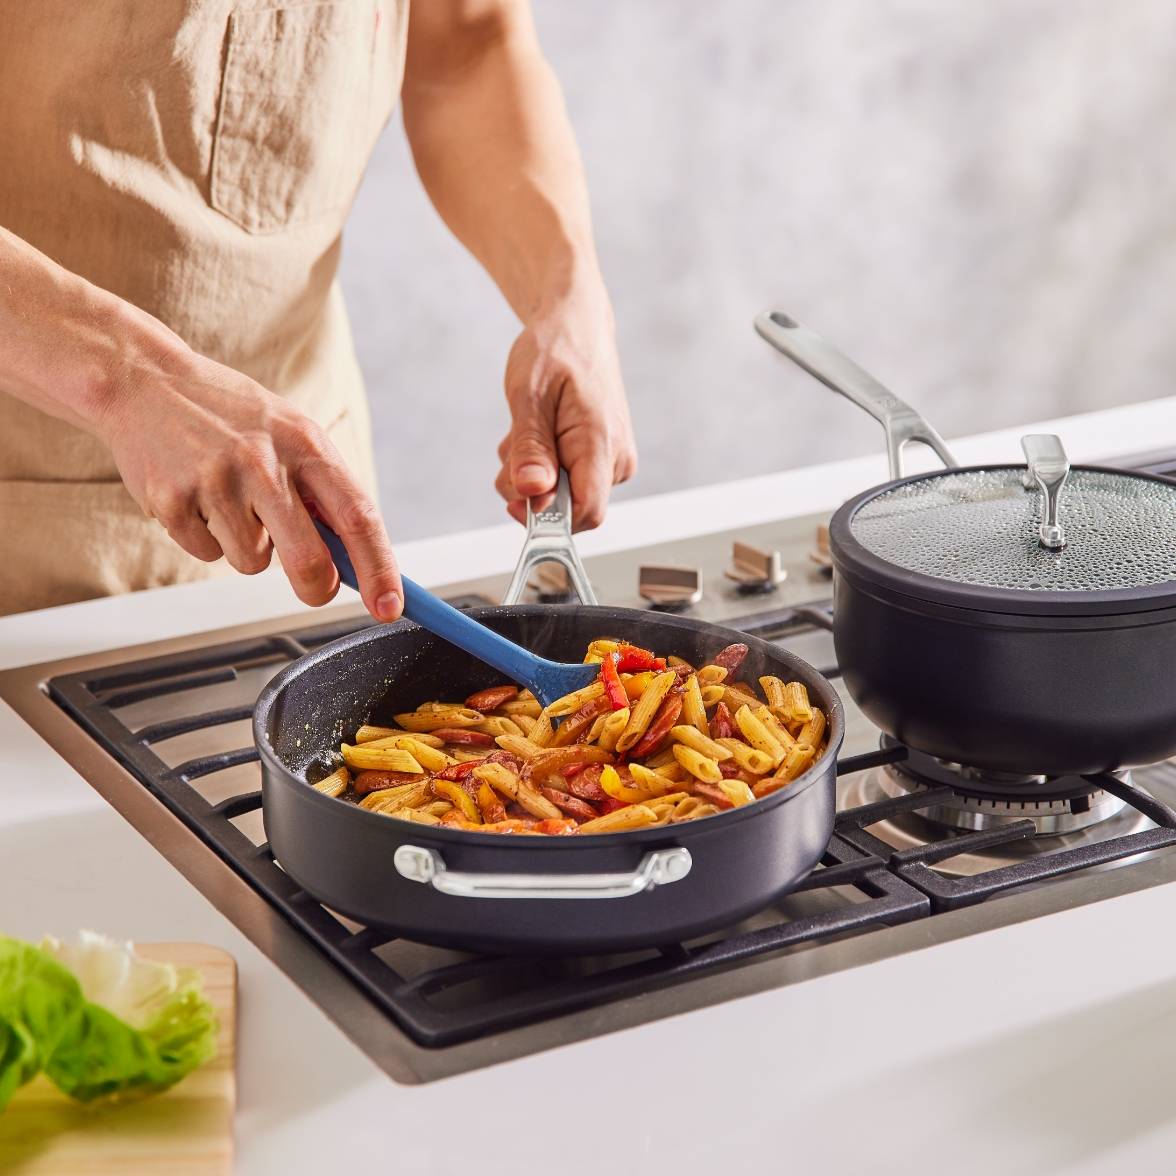 A chef’s hand uses a Misen Silicone Spoontula to stir pasta in a Misen Nonstick Sauté on a stovetop, next to a Misen Nonstick Saucier with a lid on.